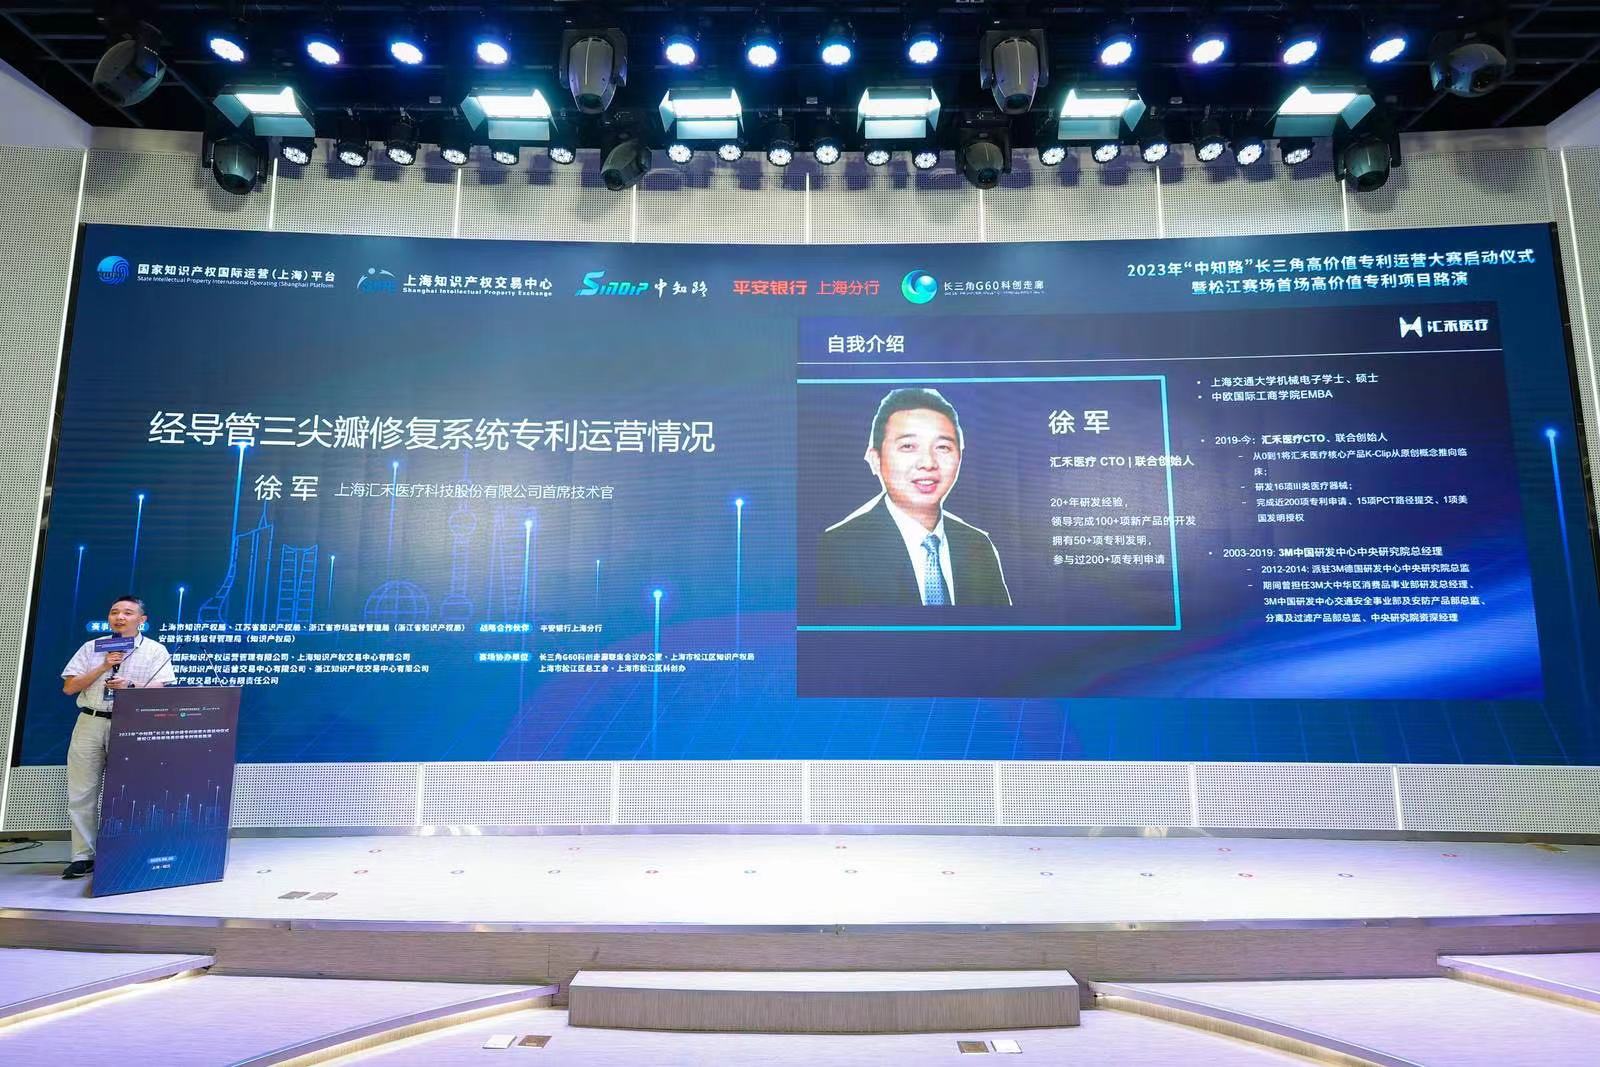 Stimulating the vitality of innovative entities, this high-value patent operation competition in the Yangtze River Delta region will be held in Songjiang, Shanghai. Project | Patent | Operation